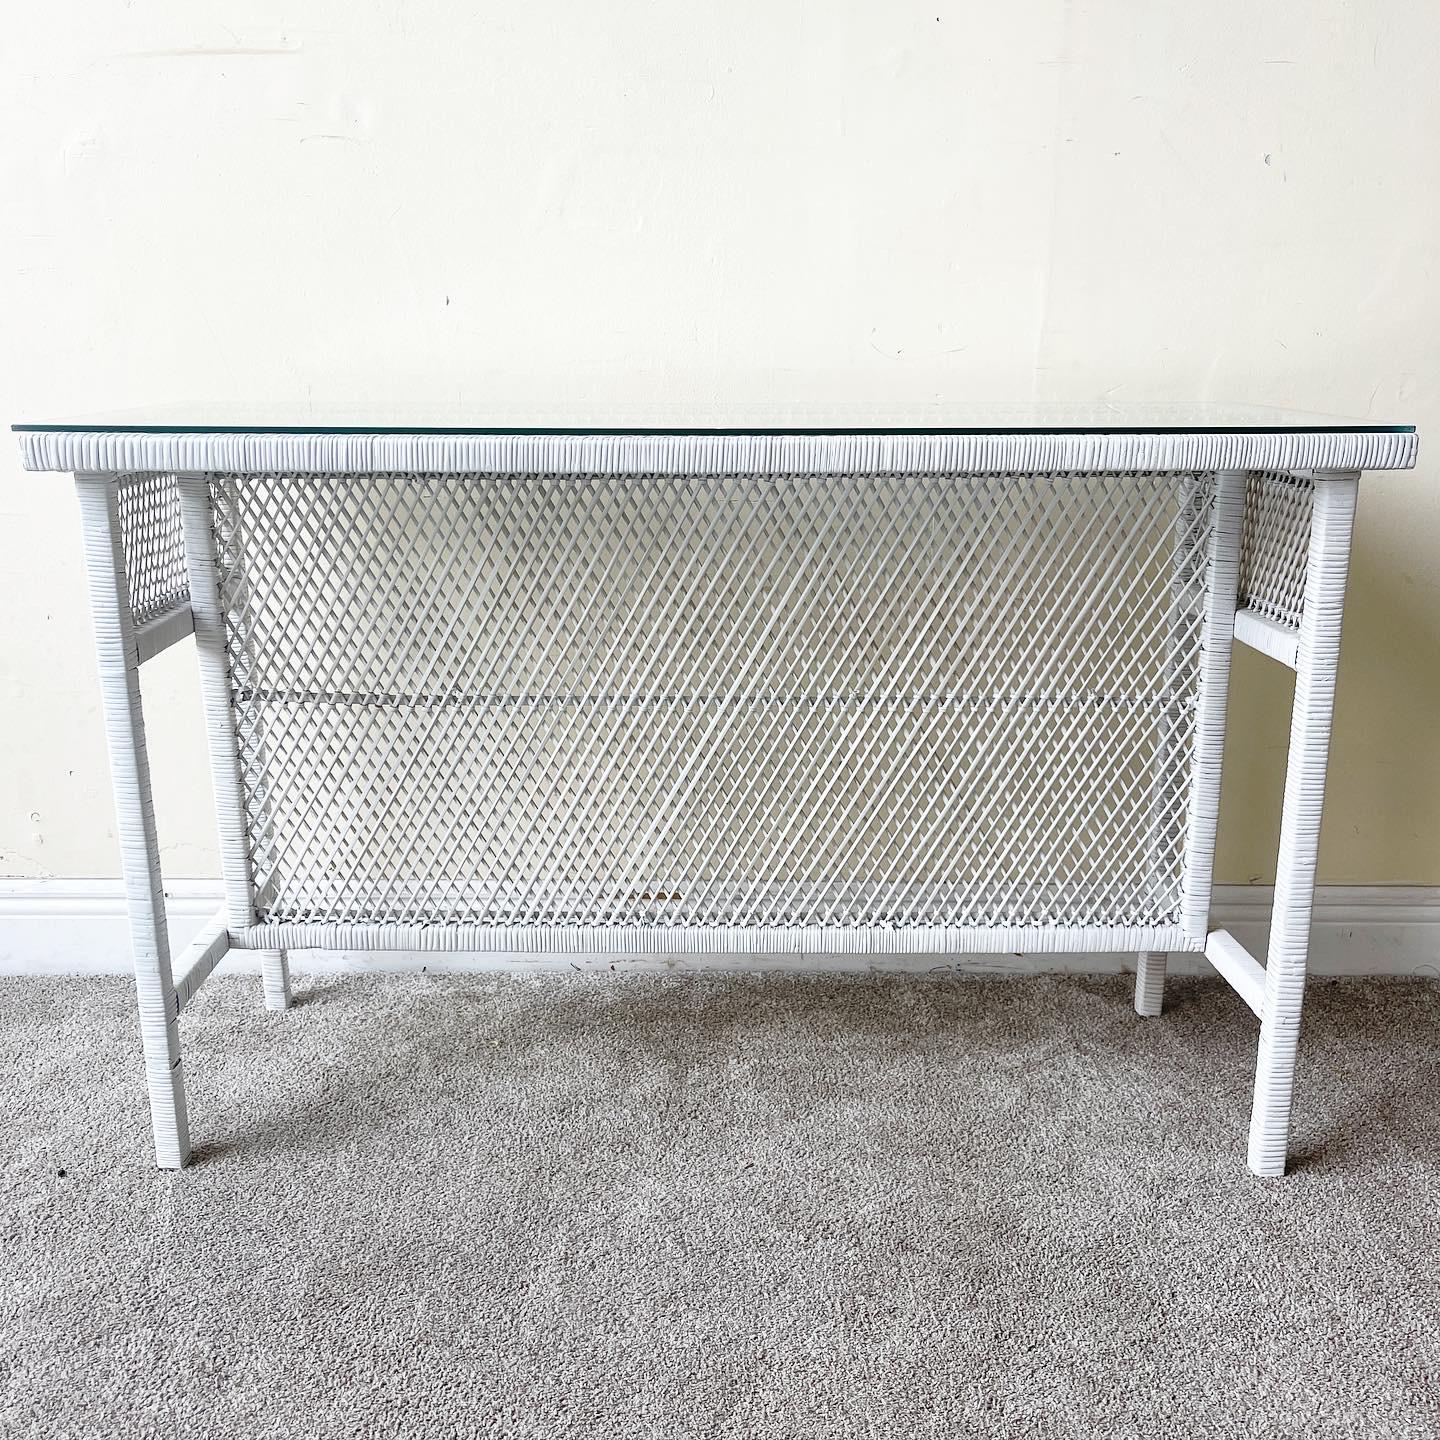 Incredible rattan console table. Features a white painted finish with a rectangular glass top.
 